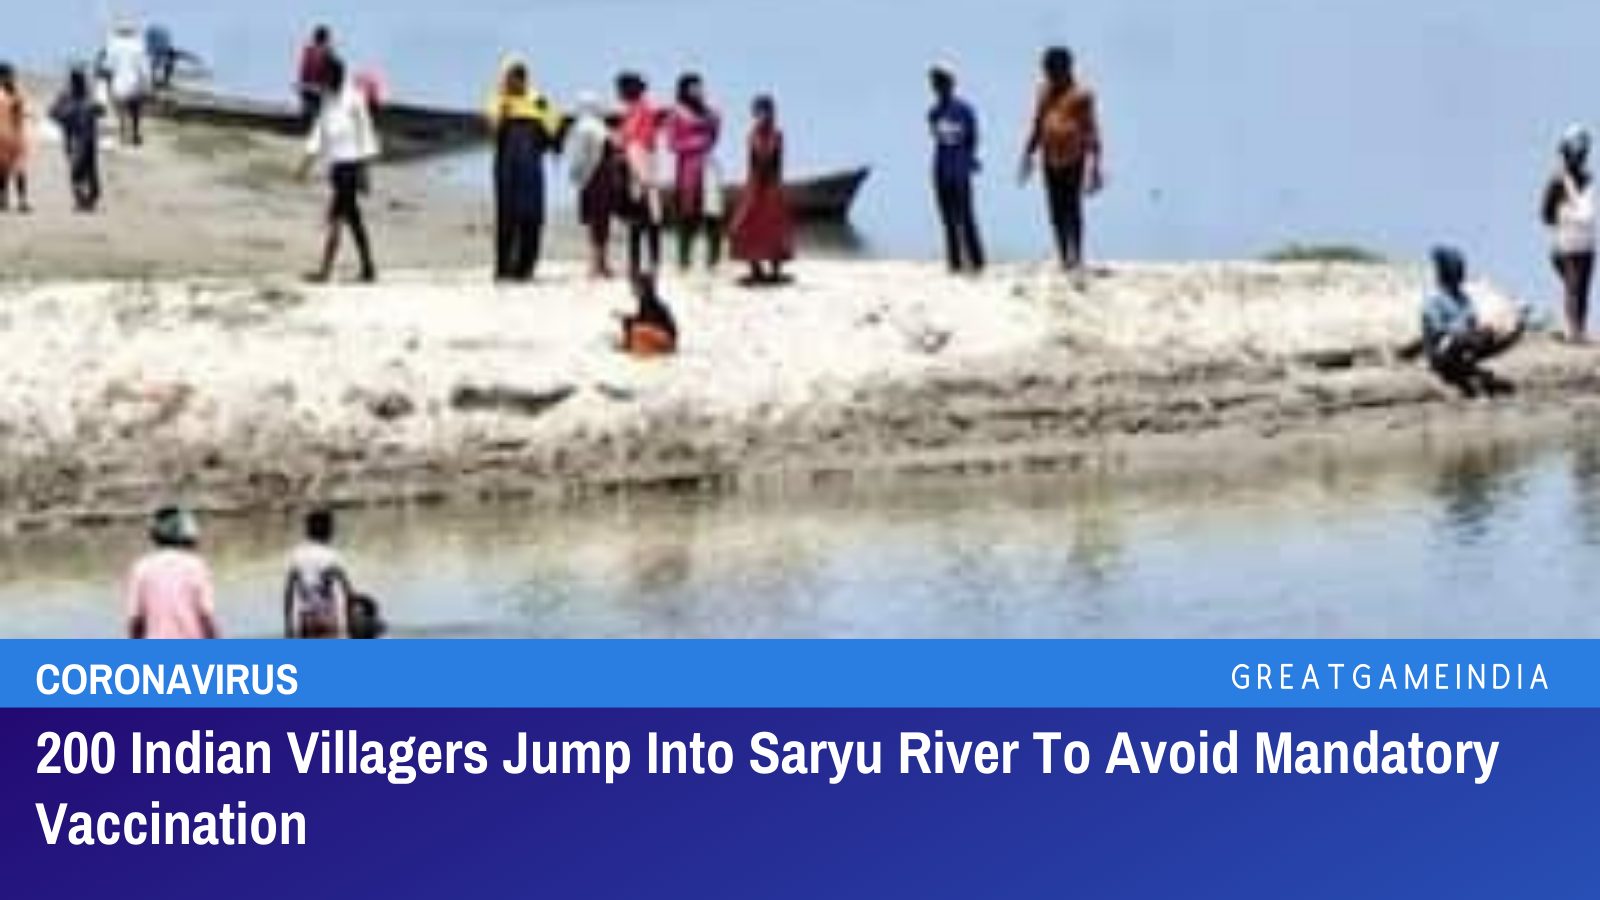 200 Indian Villagers Jump Into Saryu River To Avoid Forceful COVID-19 Vaccination